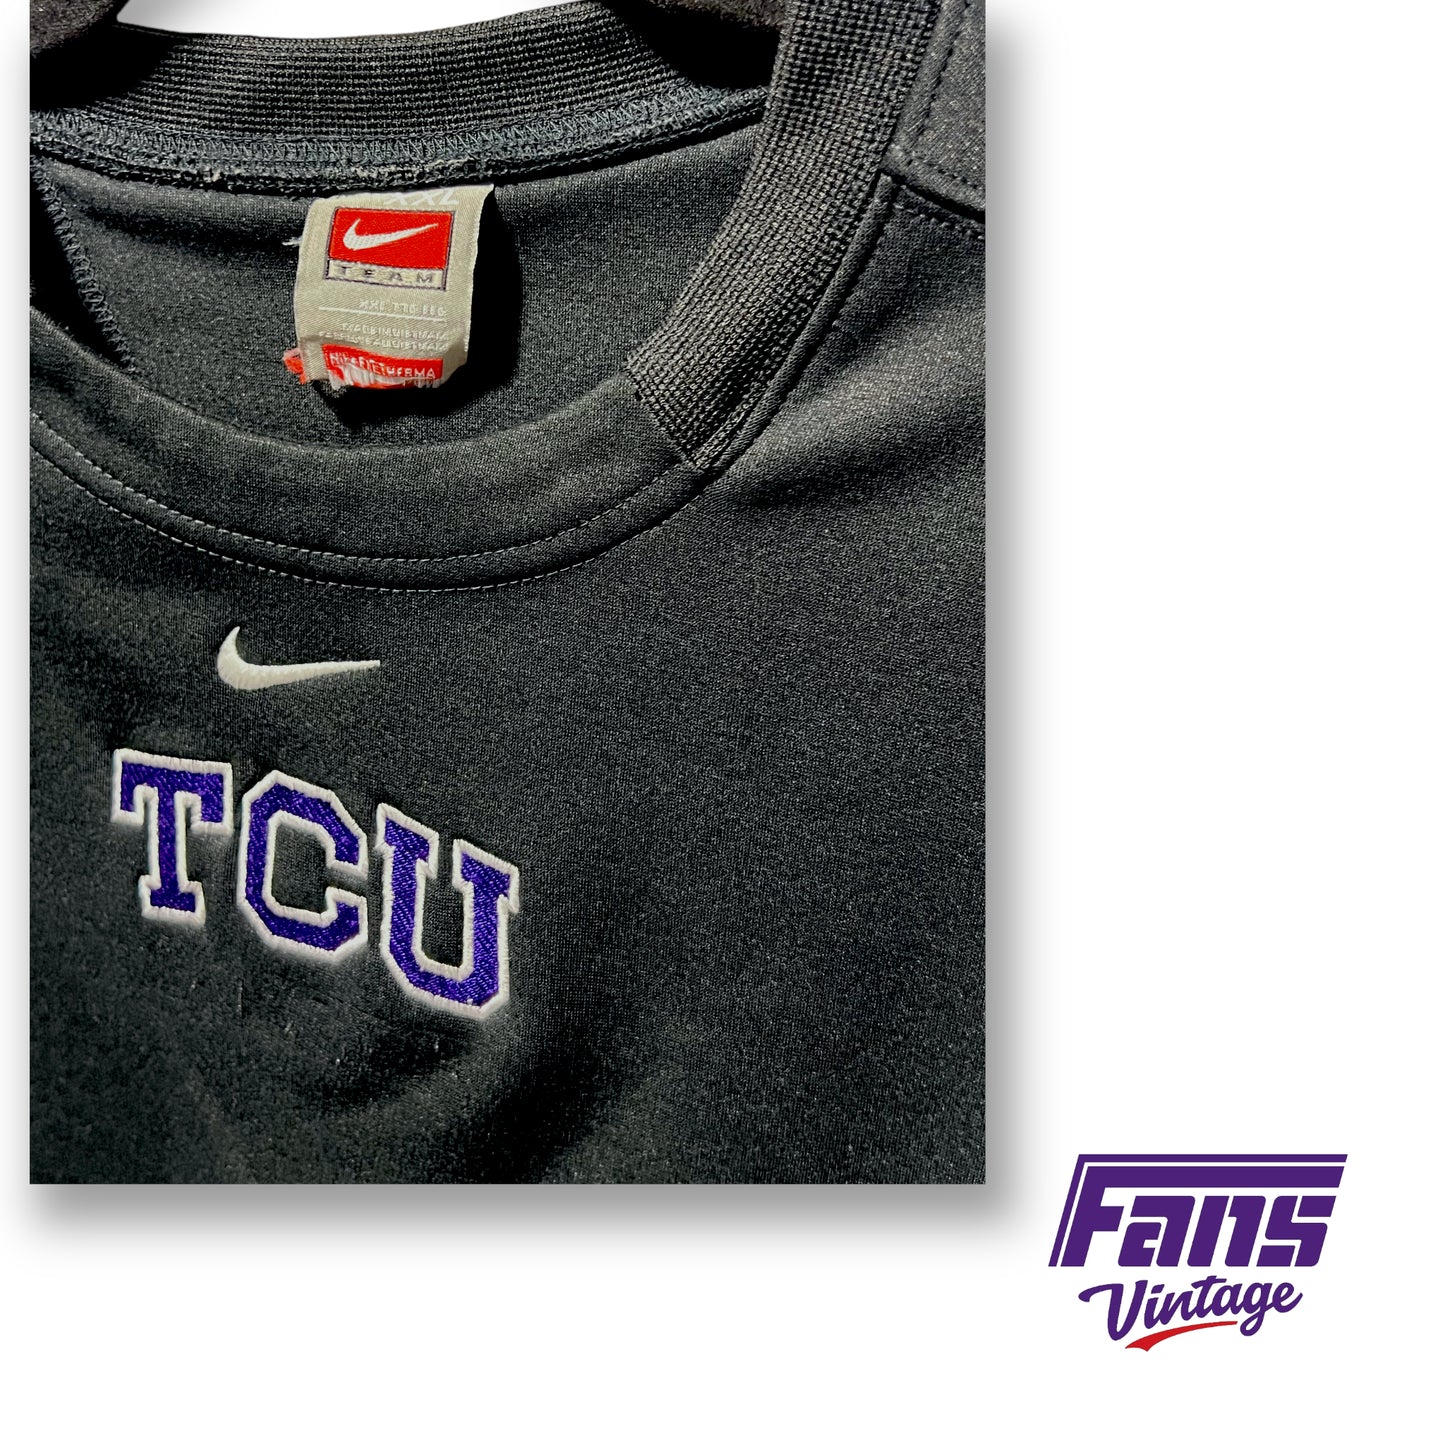 Awesome Y2K Vintage TCU Soccer Team Issued Nike Thermafit Sweater